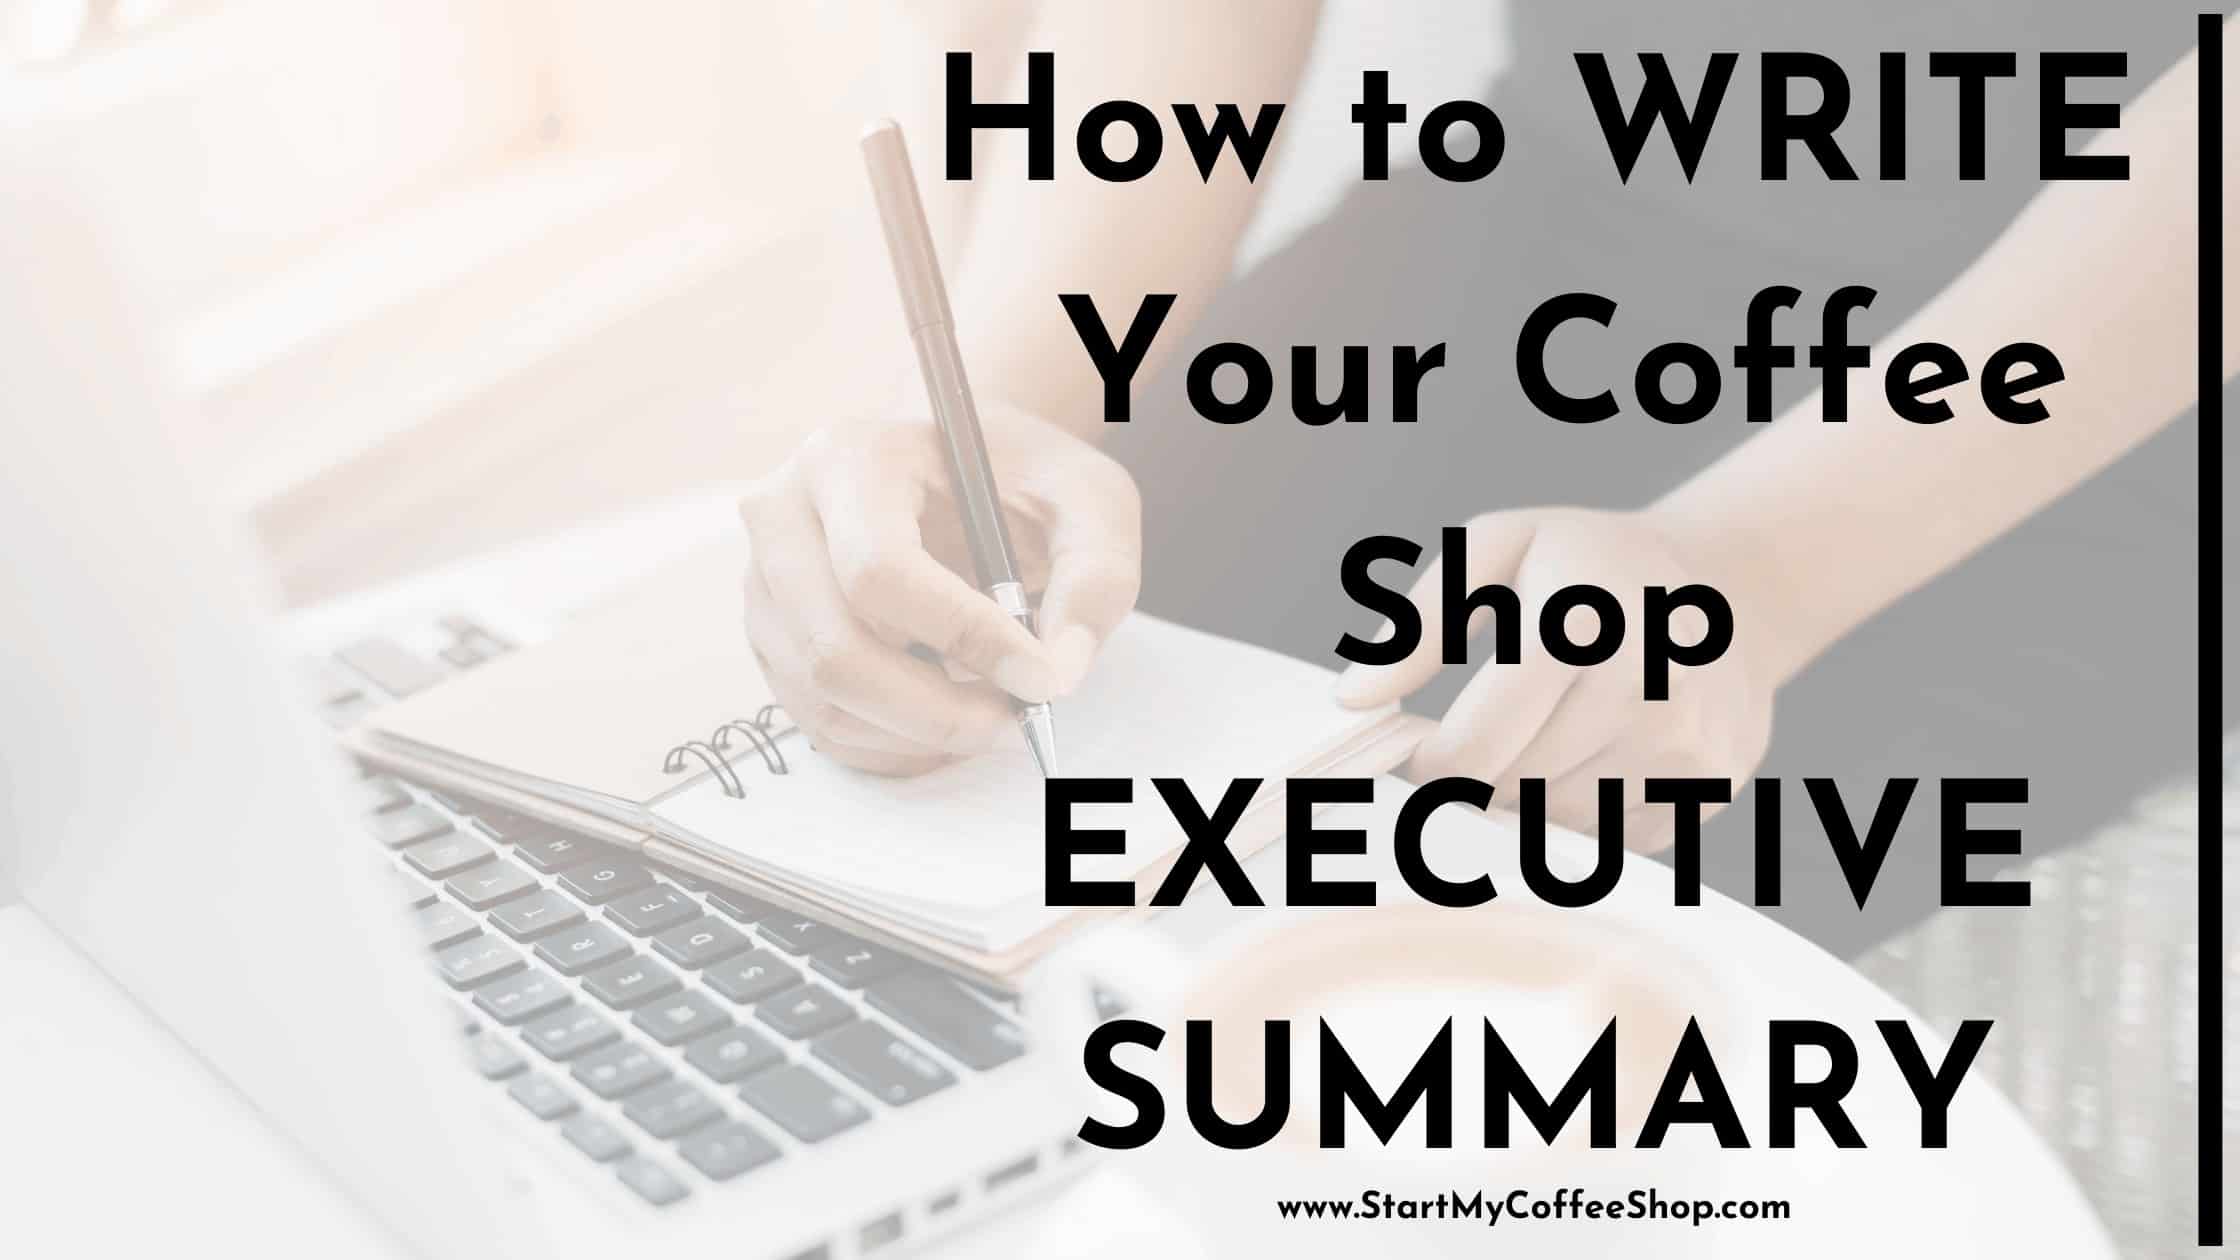 How to write your coffee shop executive summary